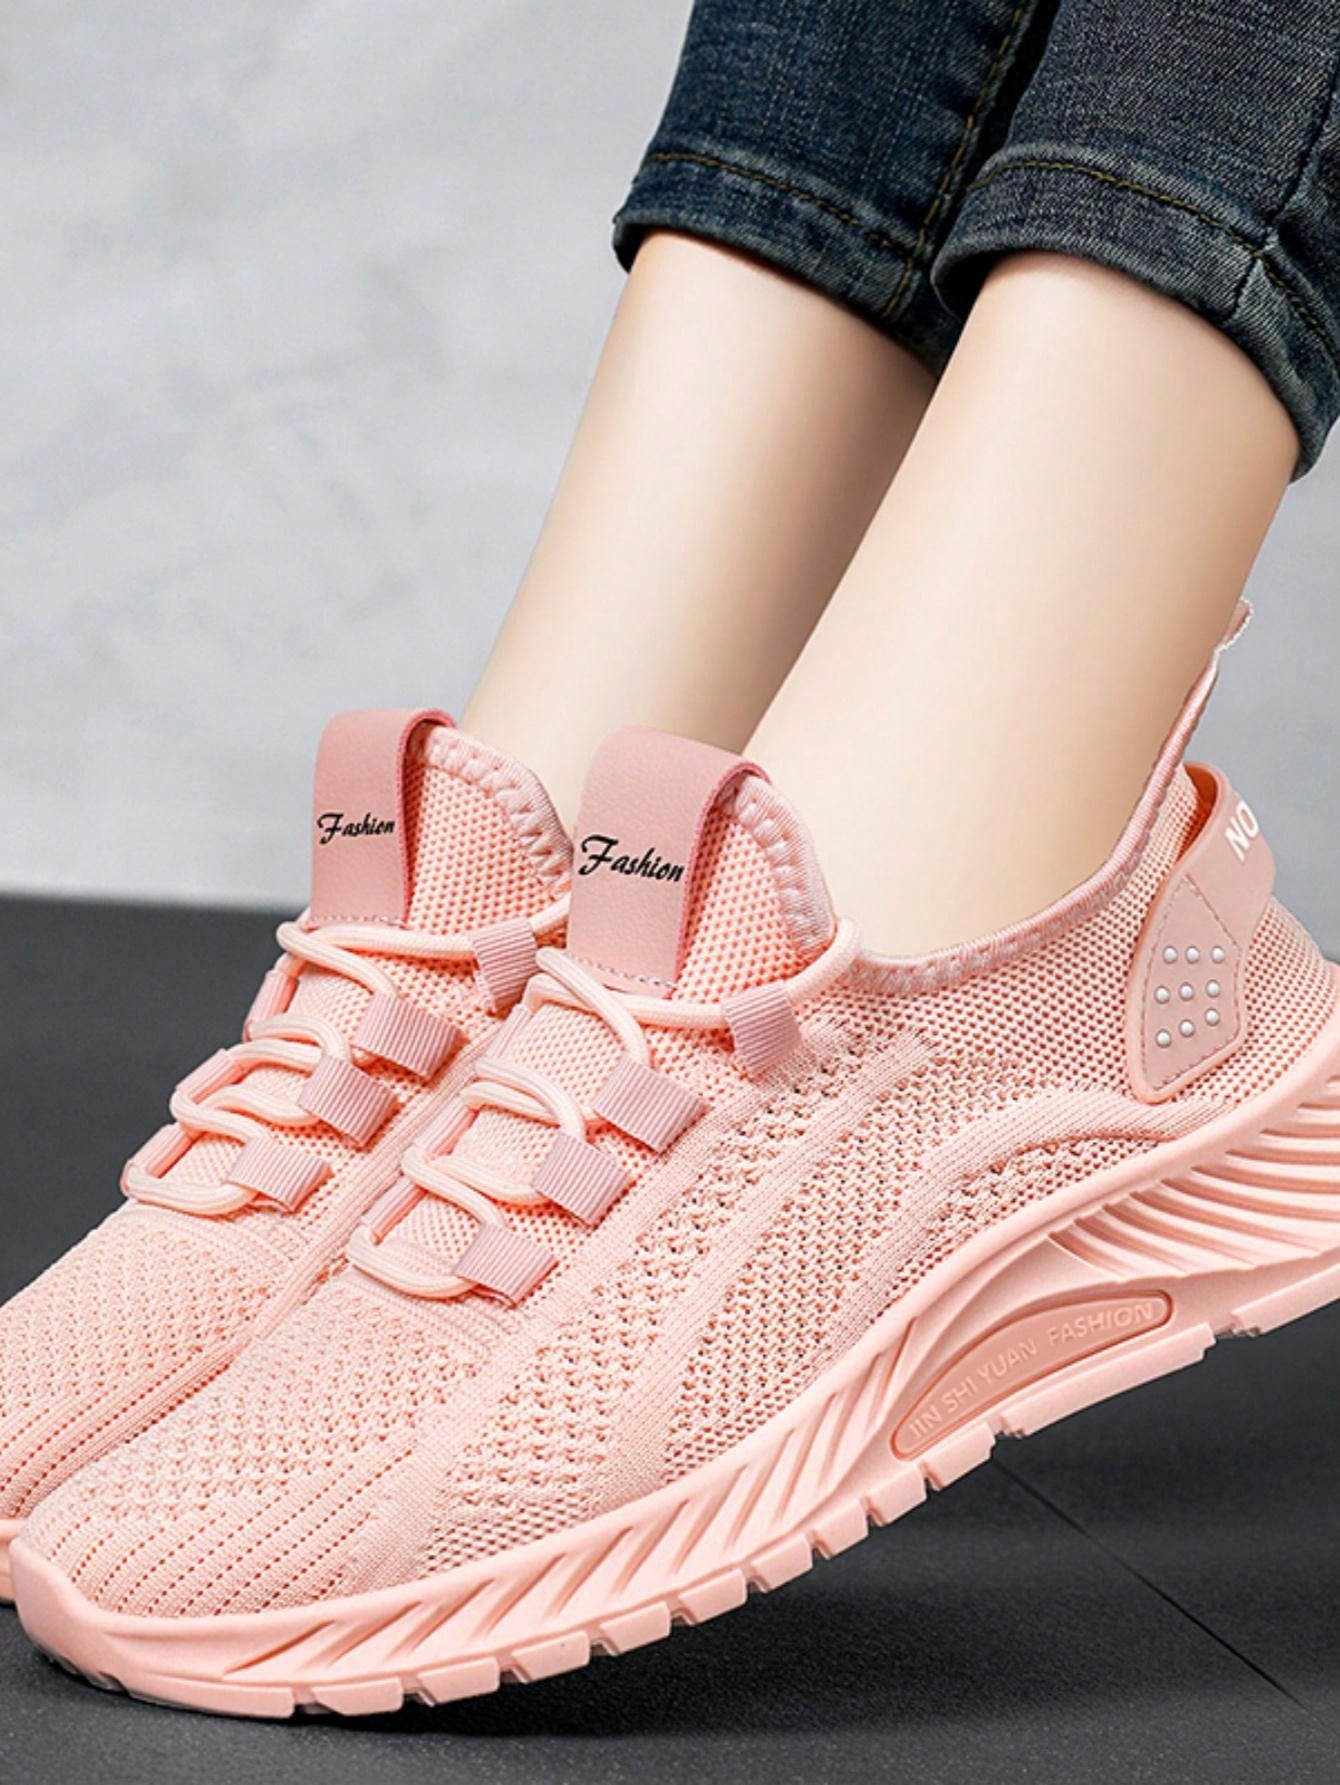 Women's Lightweight Shock-Absorbing Slip-Resistant Soft Bottom Mesh Breathable Hook Knitting Running Shoes, Casual Sports Shoes, Sneakers, Walking Shoes For All Seasons-Pink-7